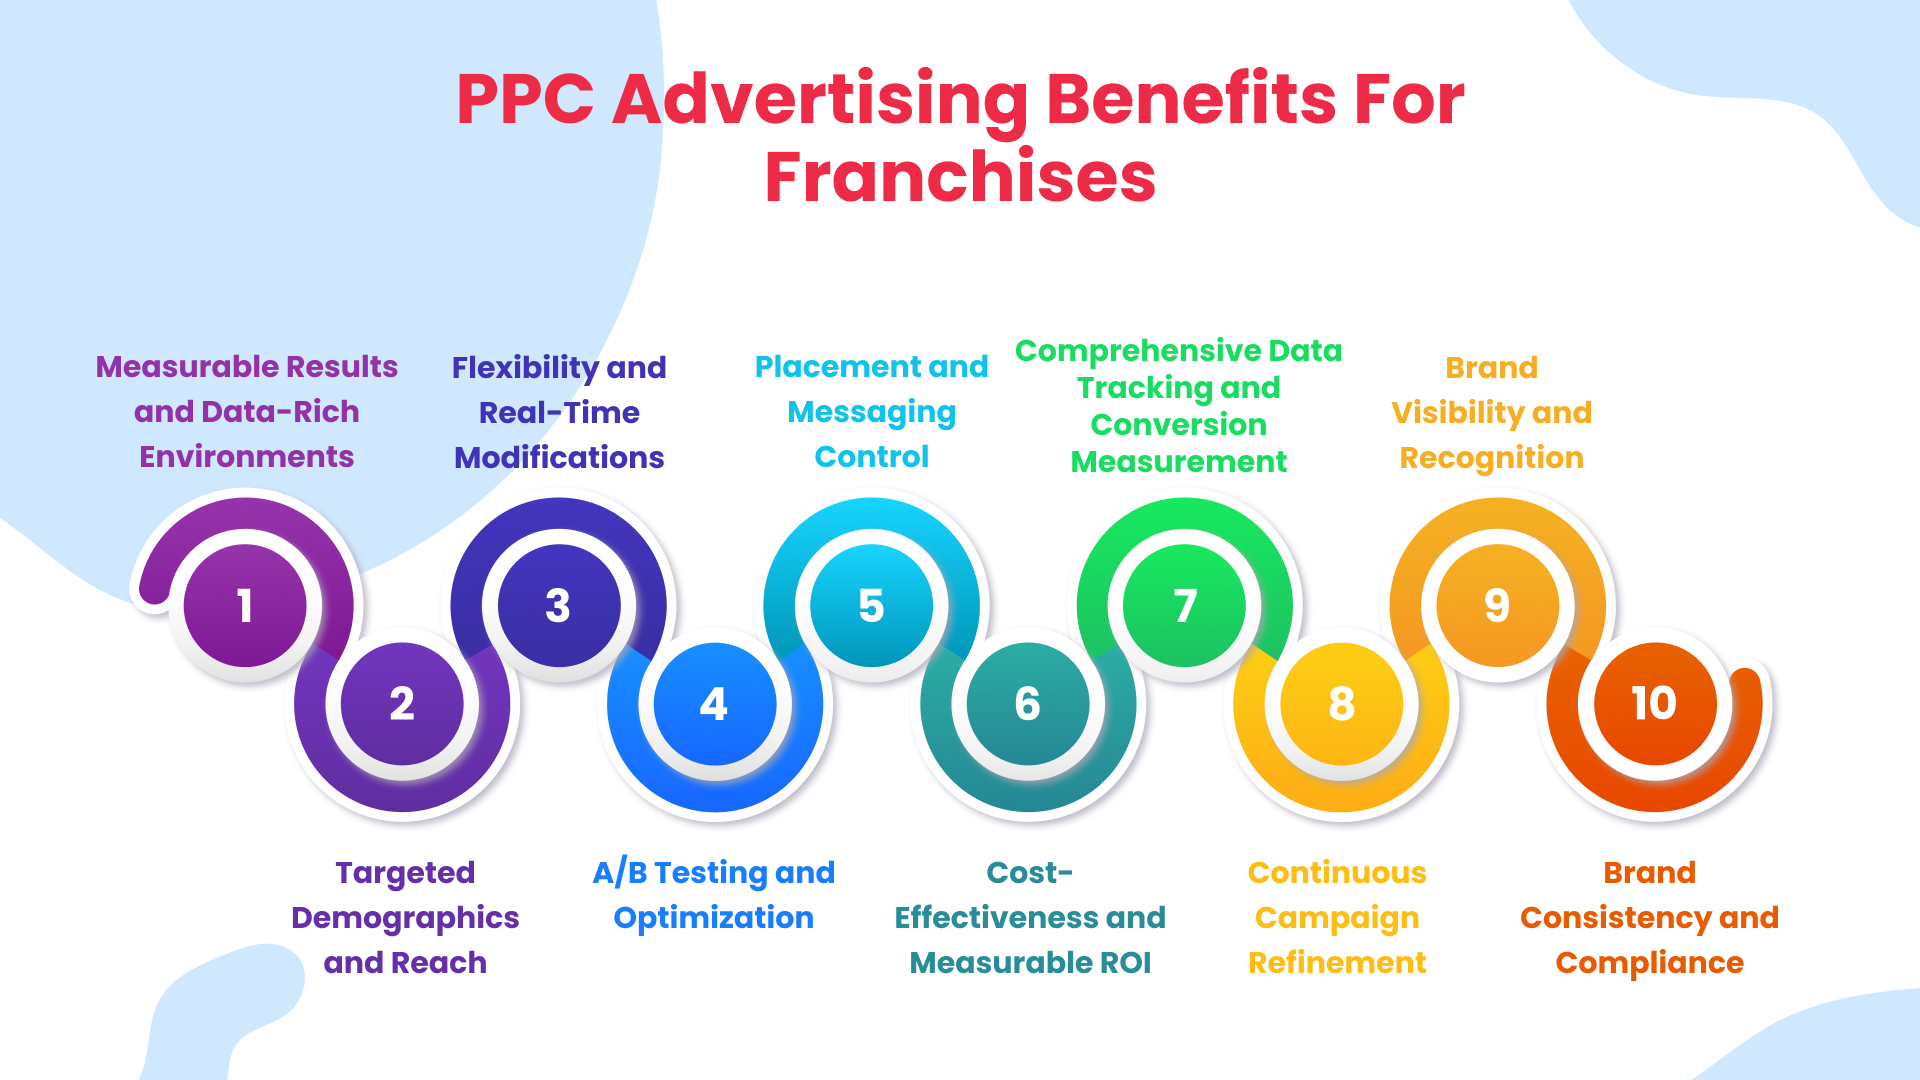 PPC Advertising Benefits for Franchises